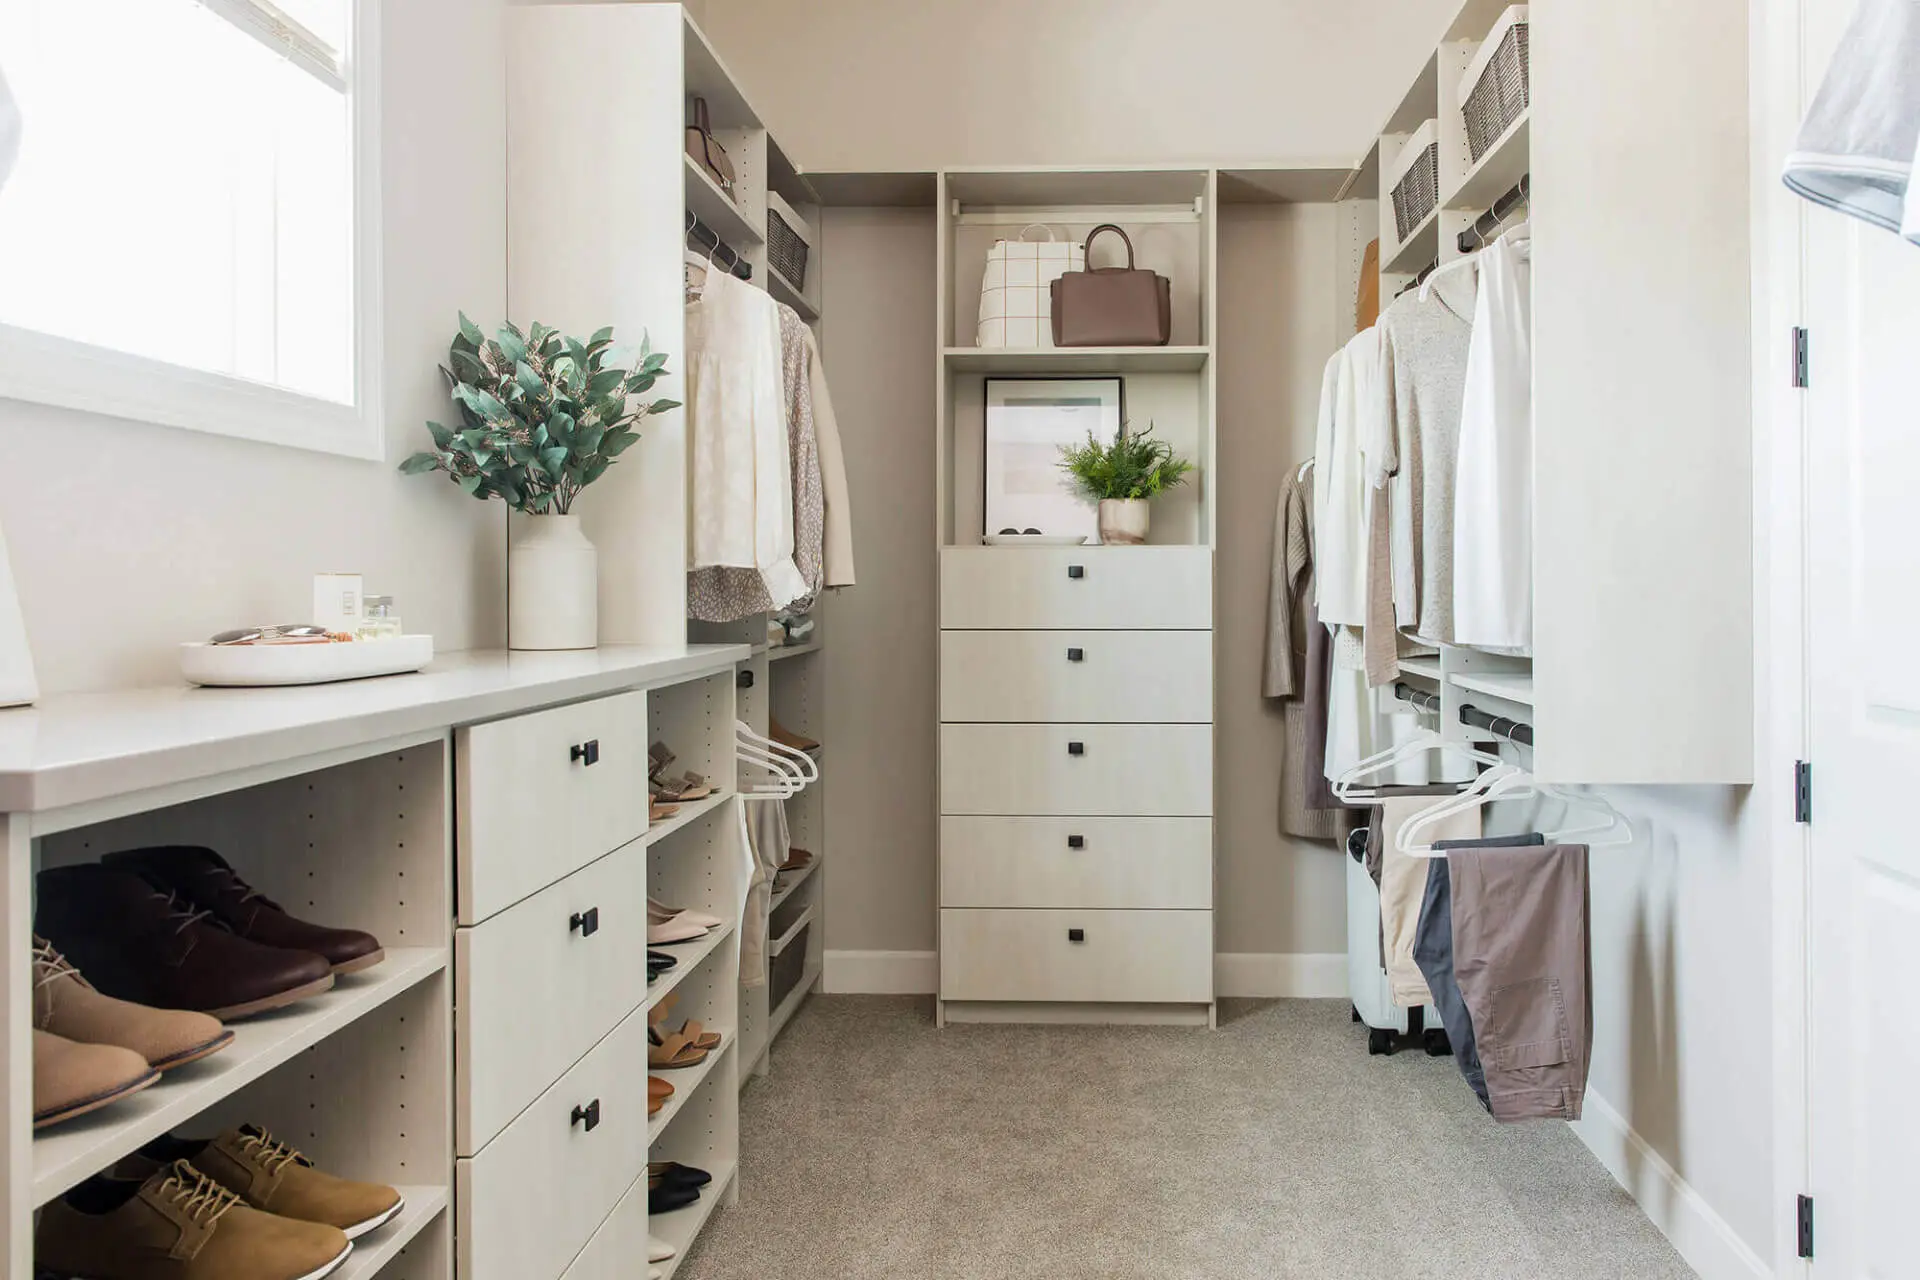 walk in closet in the bathroom = perfection